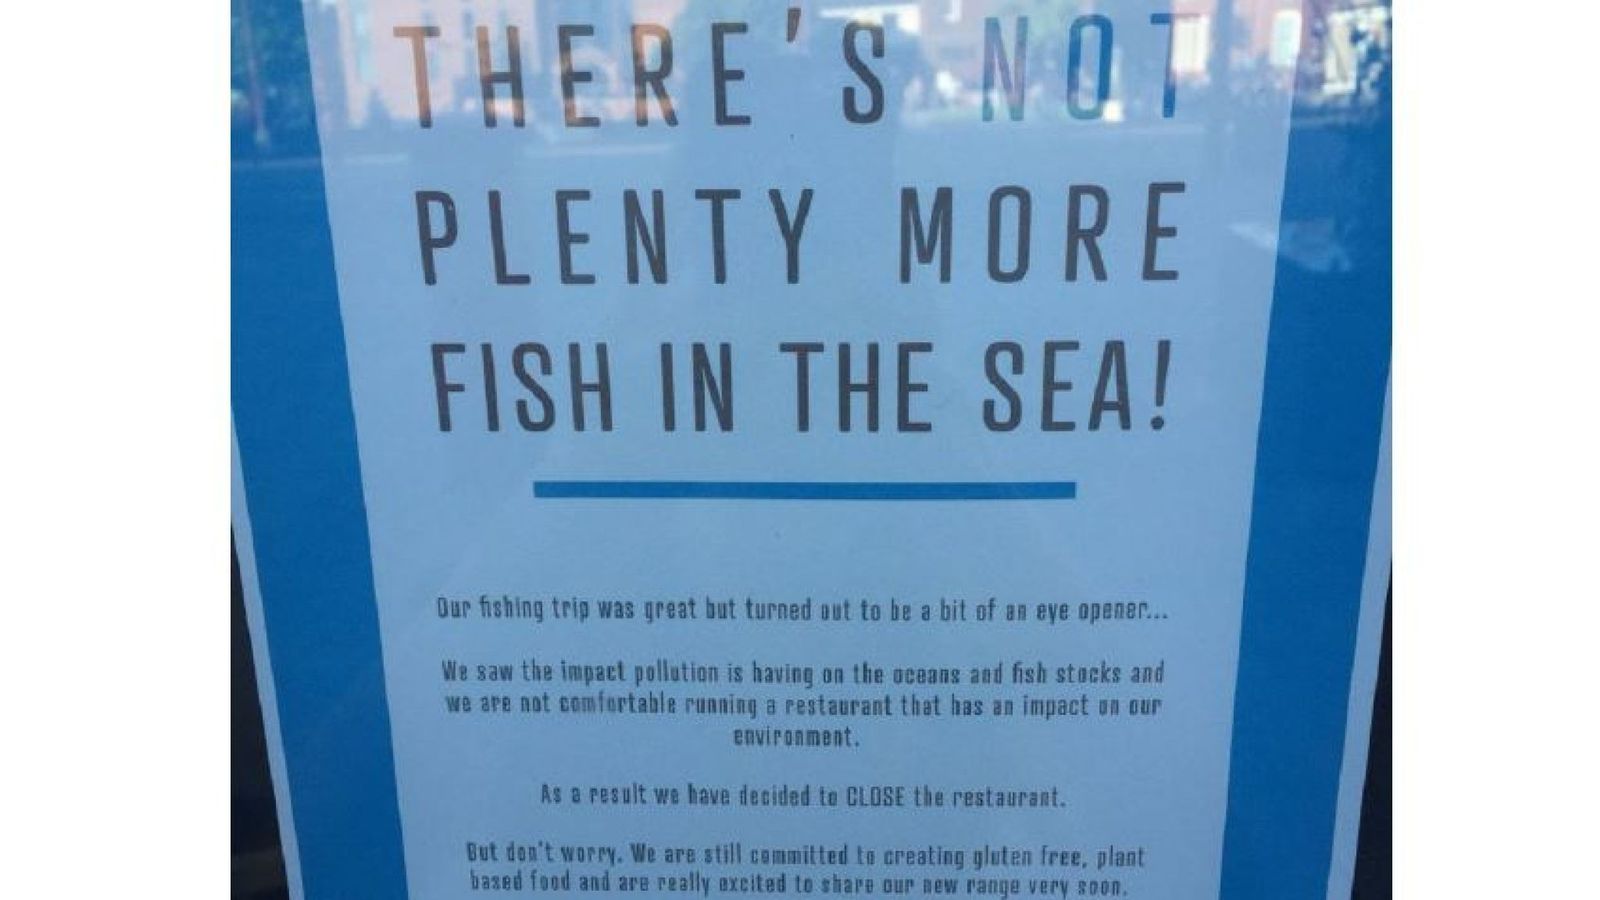 Fish and chip restaurant closes when owners witness depleted sea